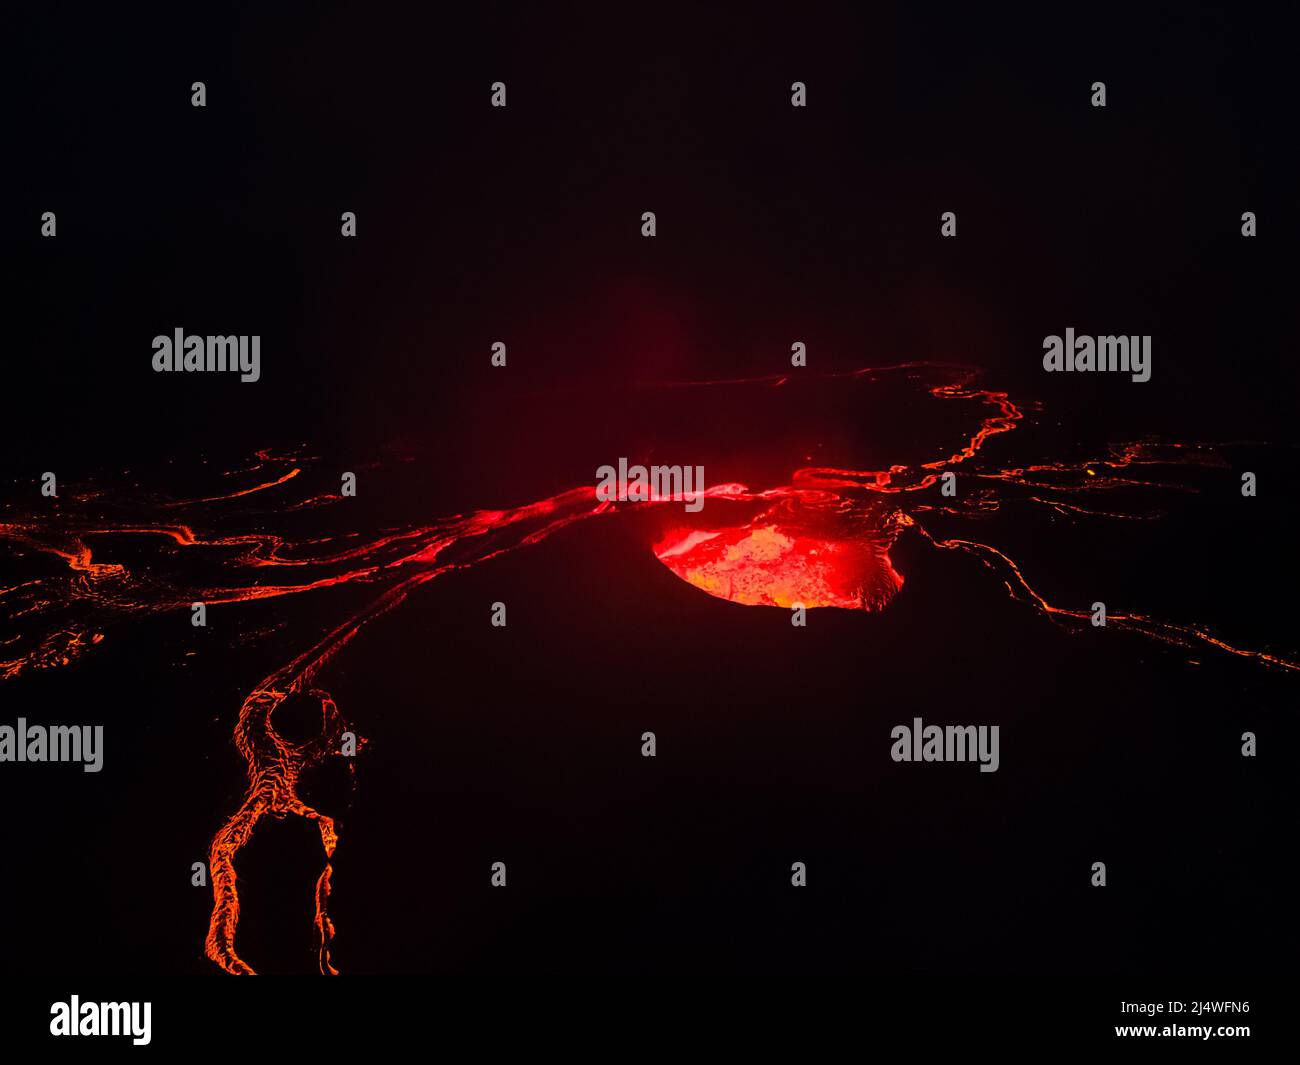 Impressive aerial view of the exploding red lava from the Active Volcano in Iceland Stock Photo